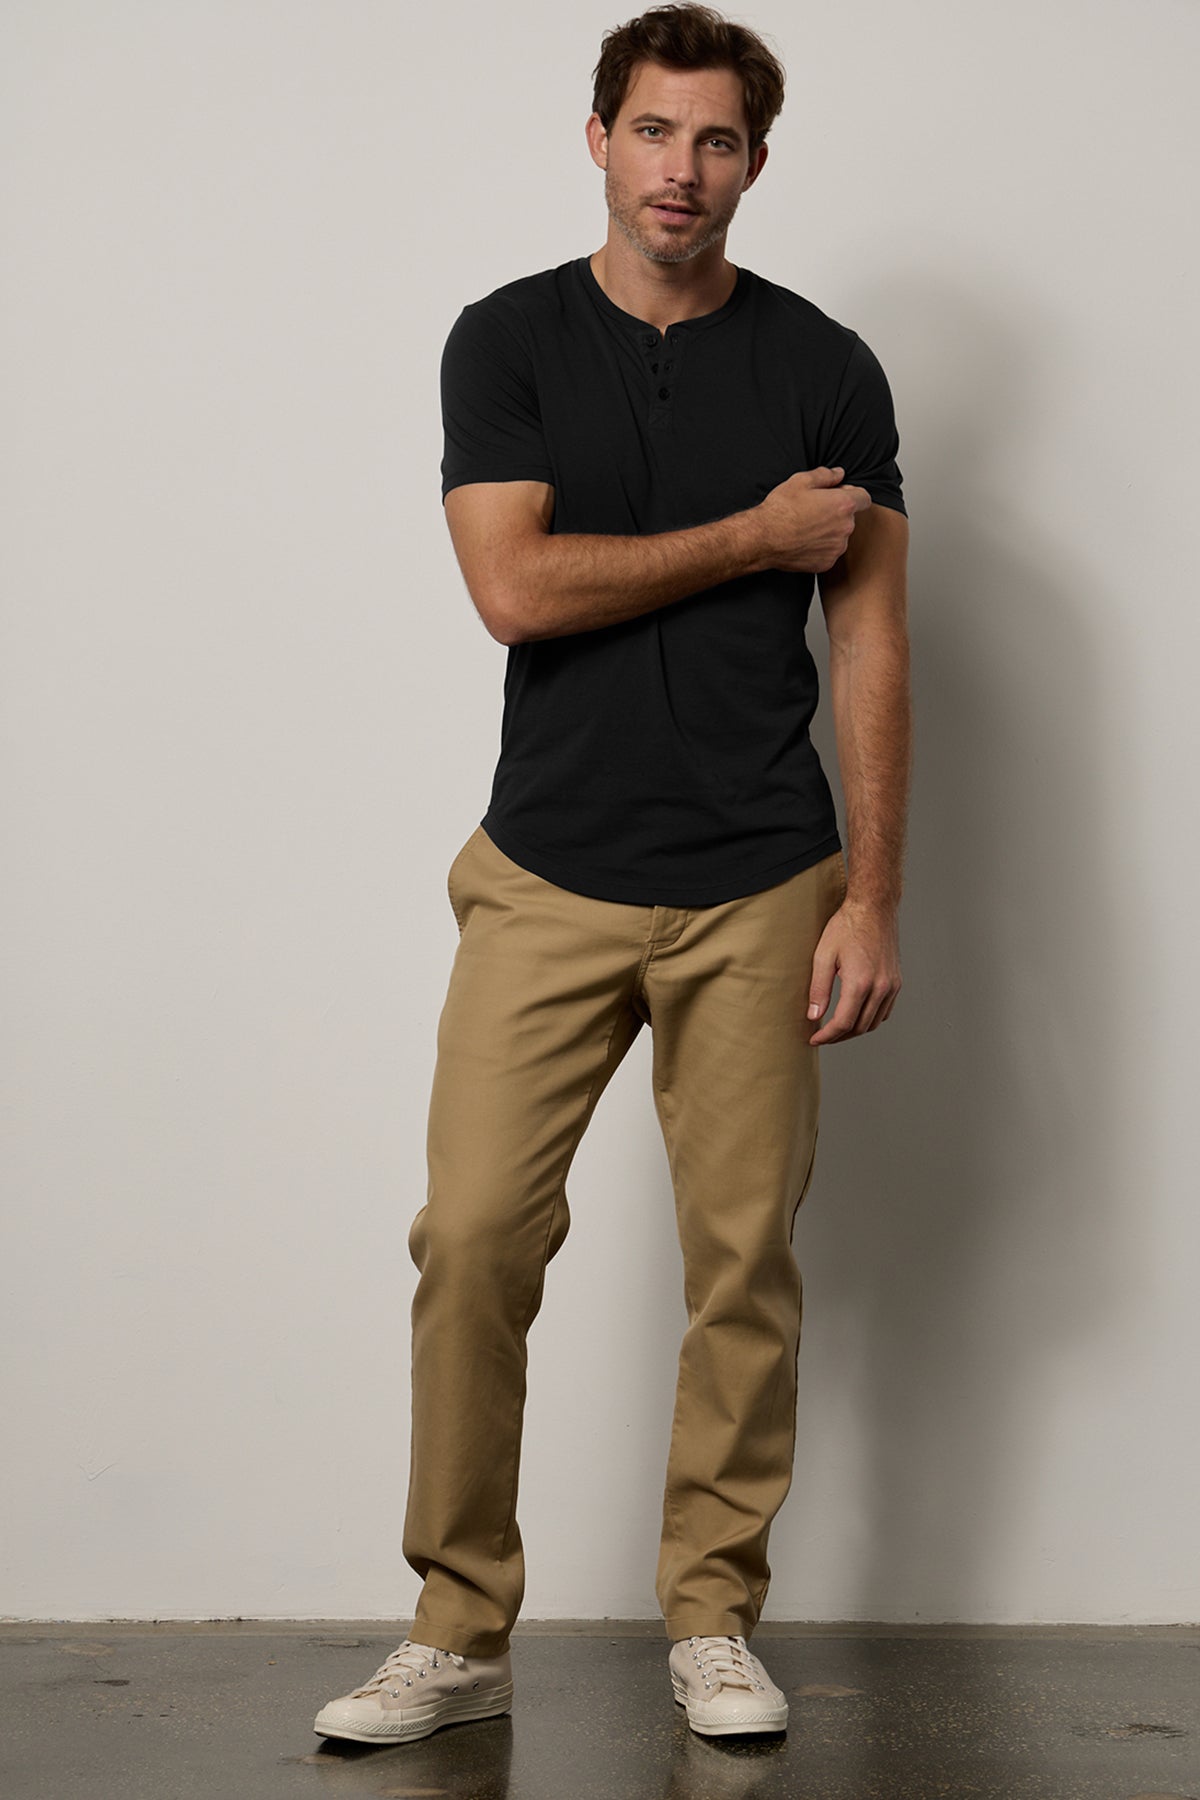   Fulton Short Sleeve Henley in black with Aiden pant in khaki full length front with white Converse 